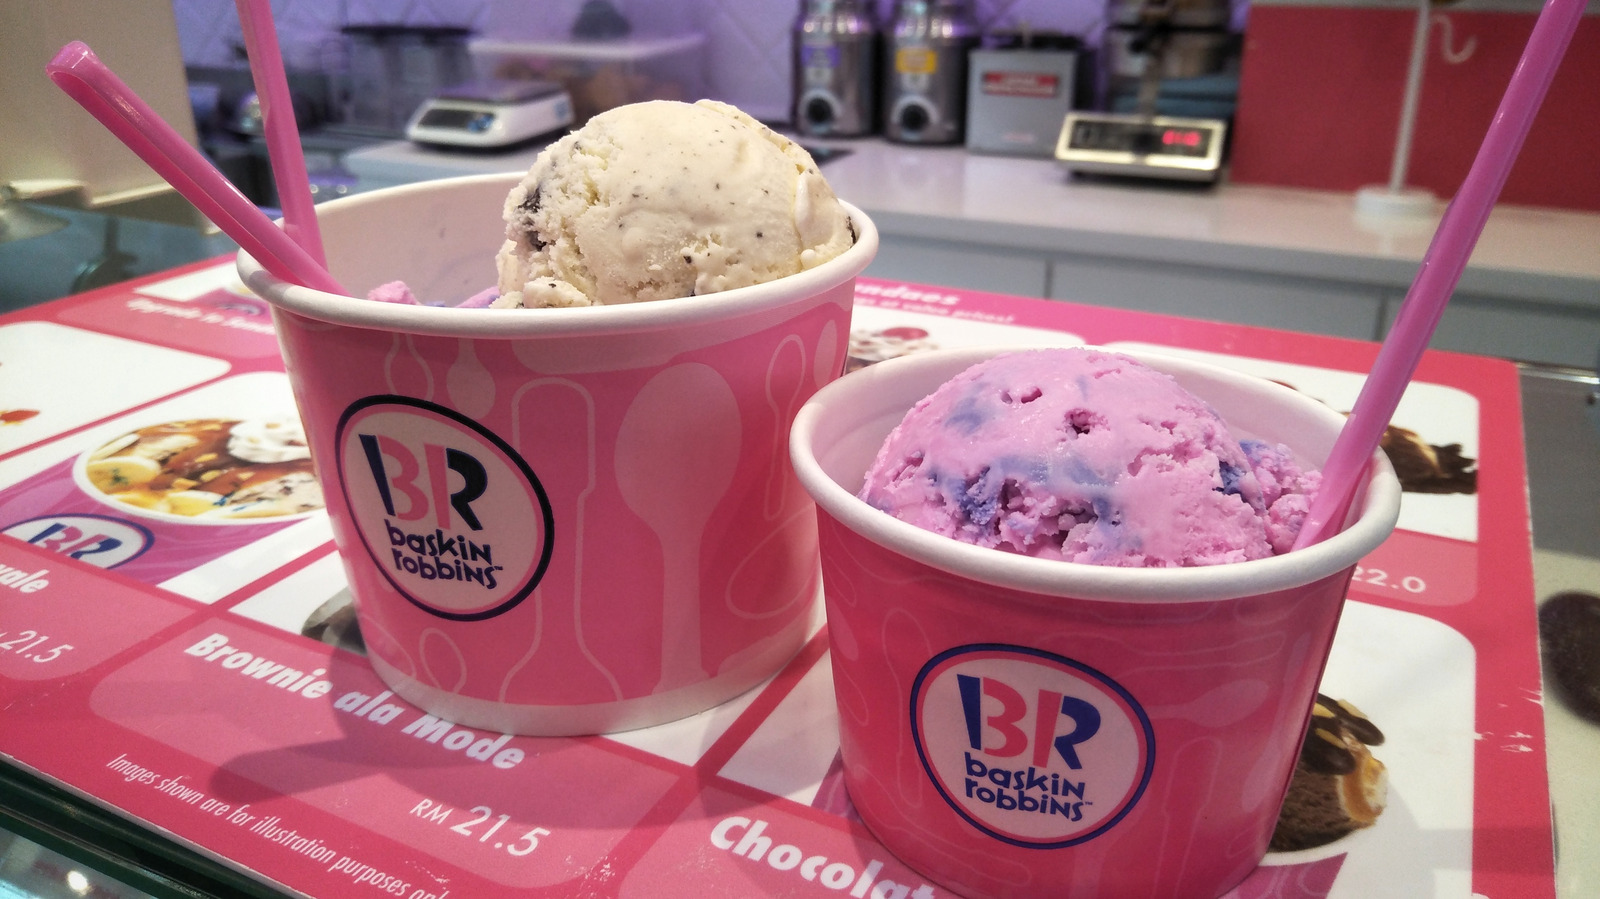 the-bizarre-topping-baskin-robbins-just-added-to-their-menu